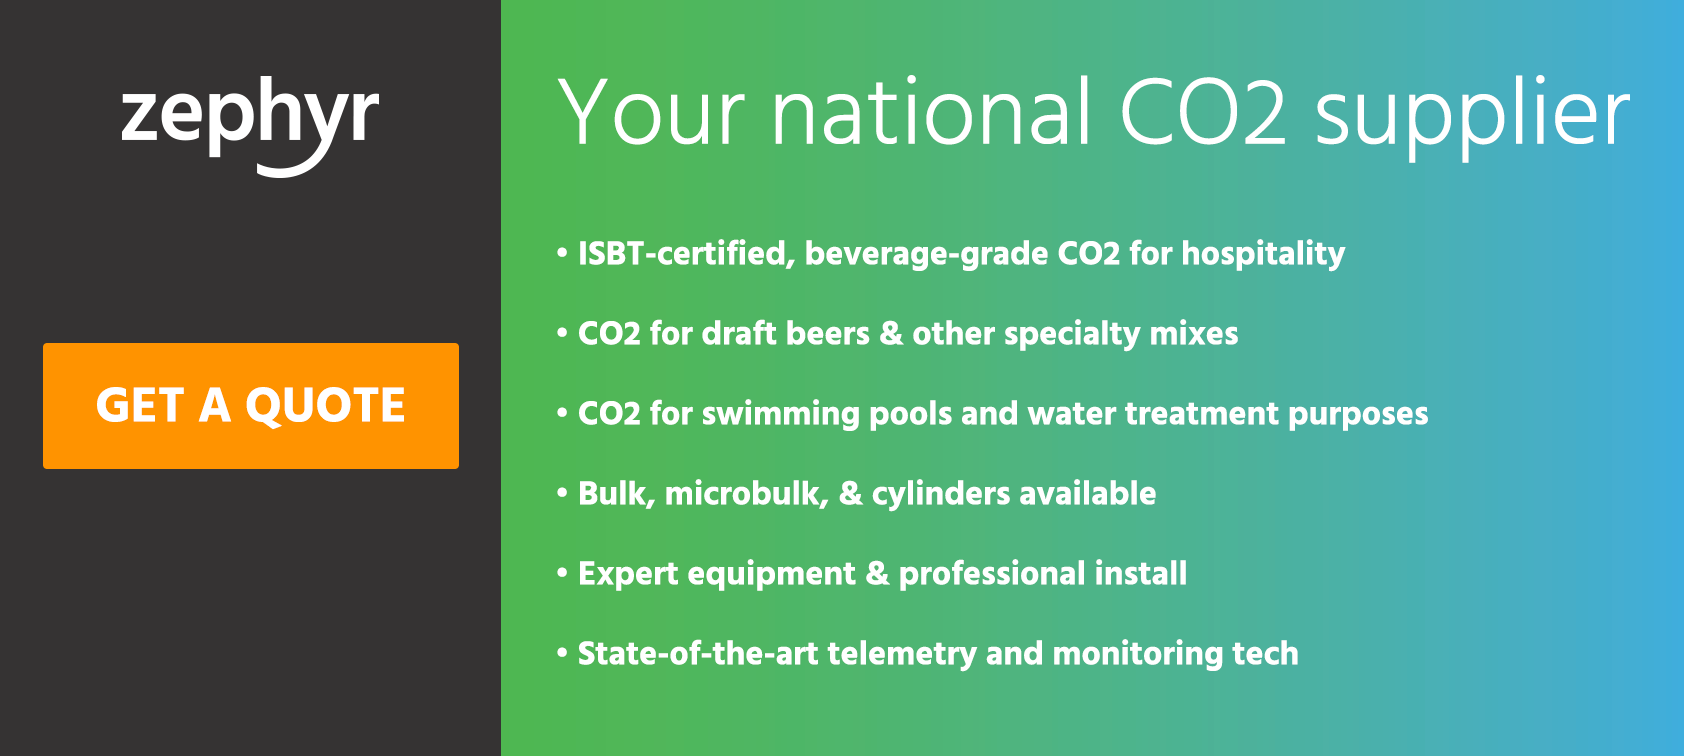 Get a free CO2 quote from Zephyr